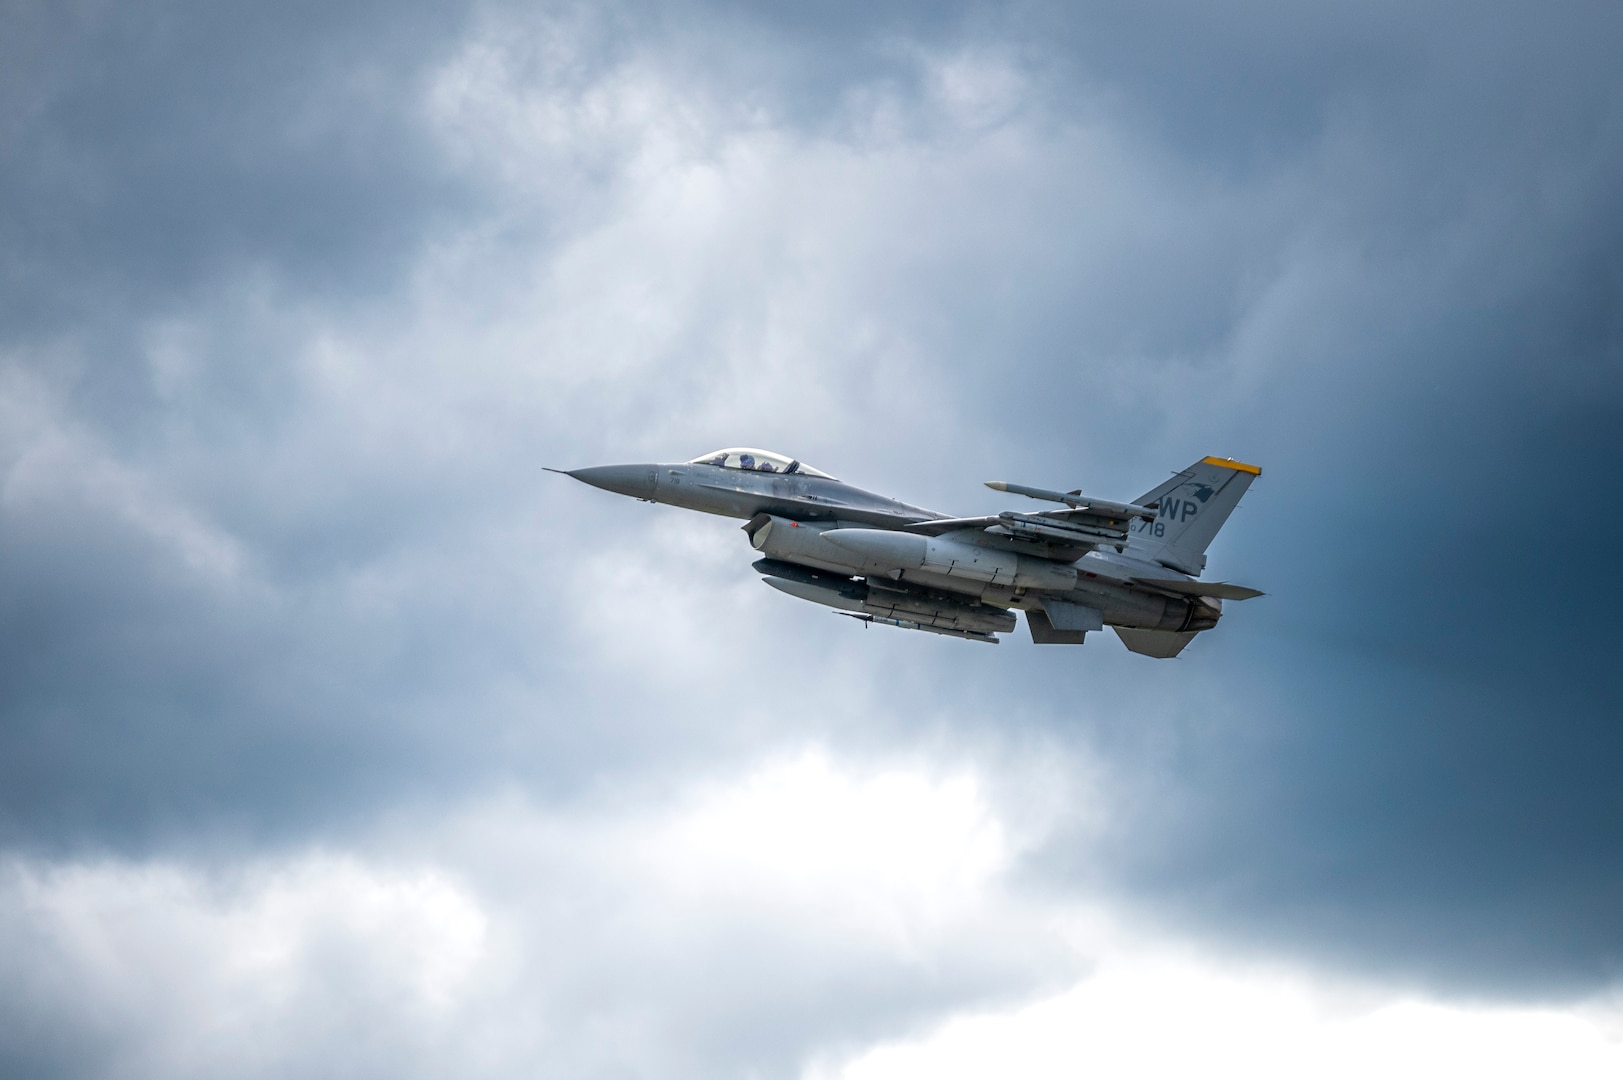 Kunsan AB F-16 Fighting Falcon flies in sky during RED FLAG exercise